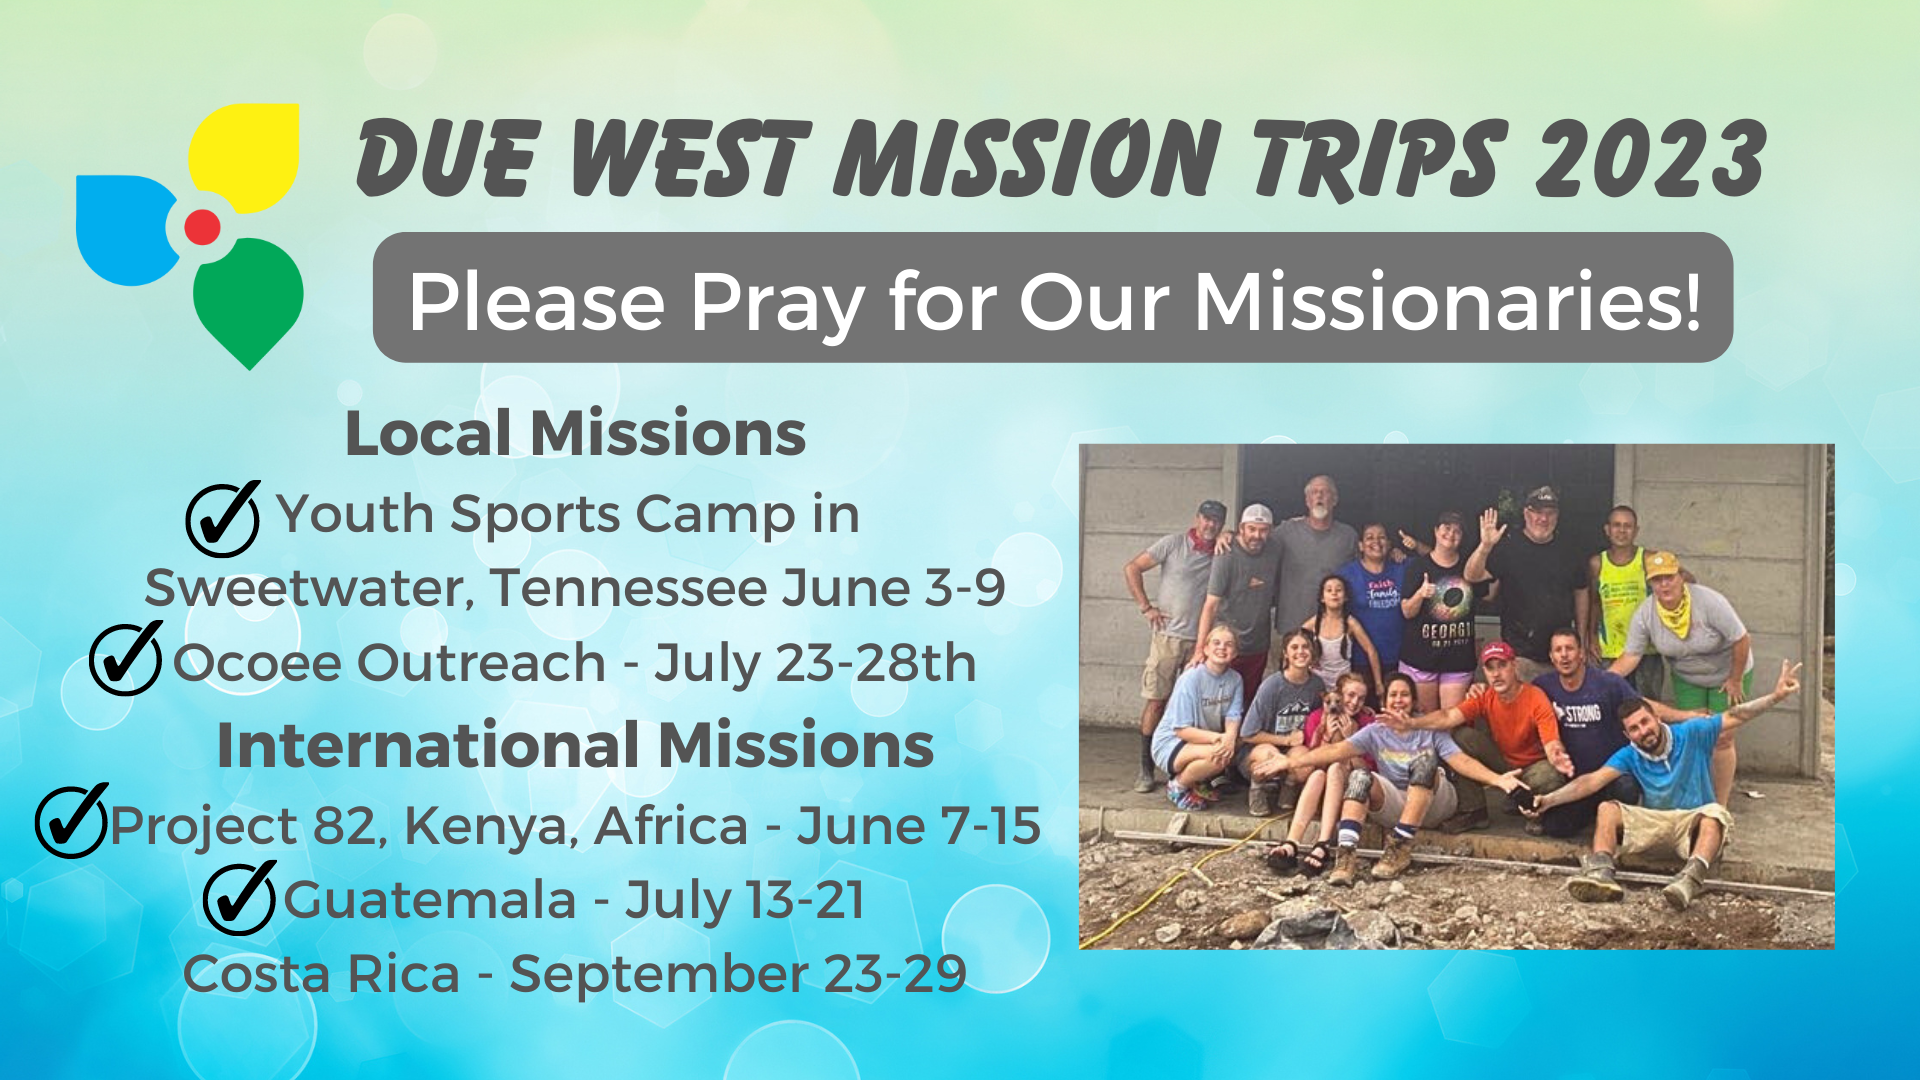 Mission Trips Graphic for Insight (1920 × 1080 px) (2).png